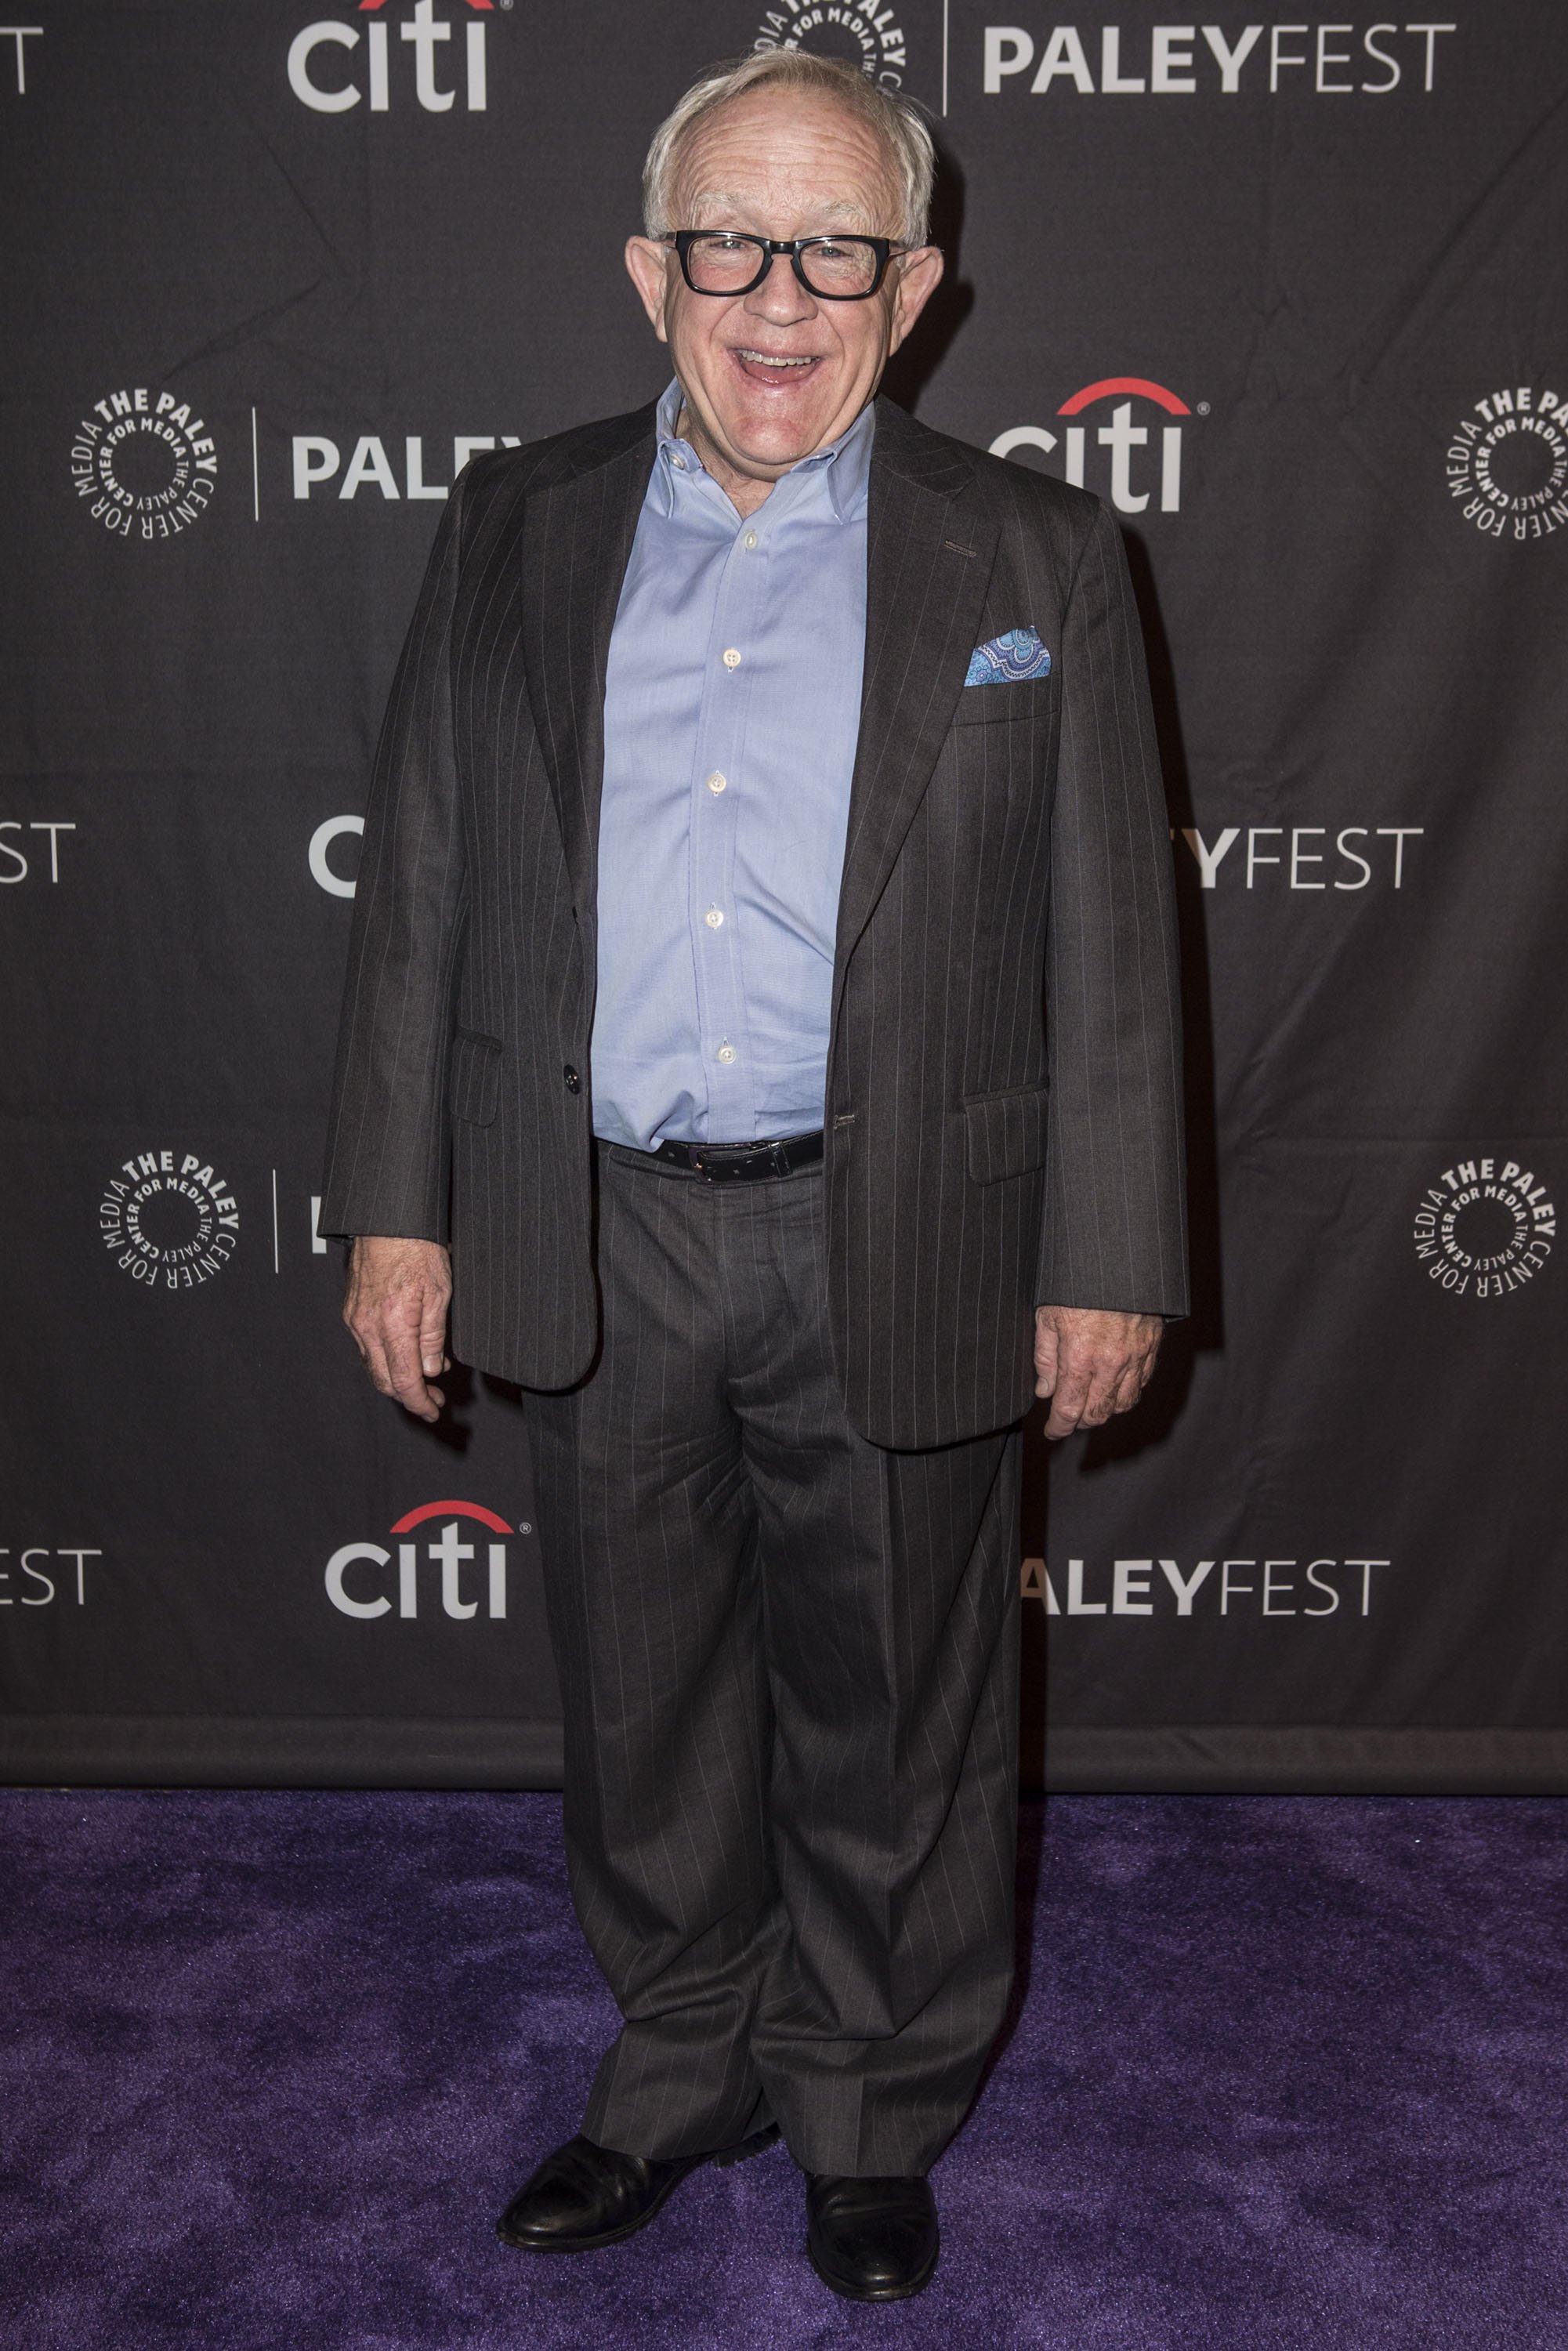 Leslie Jordan attends The Paley Center For Media's 2018 PaleyFest Fall TV Preview at The Paley Center for Media on September 13, 2018 in Beverly Hills, California | Photo: Getty Images